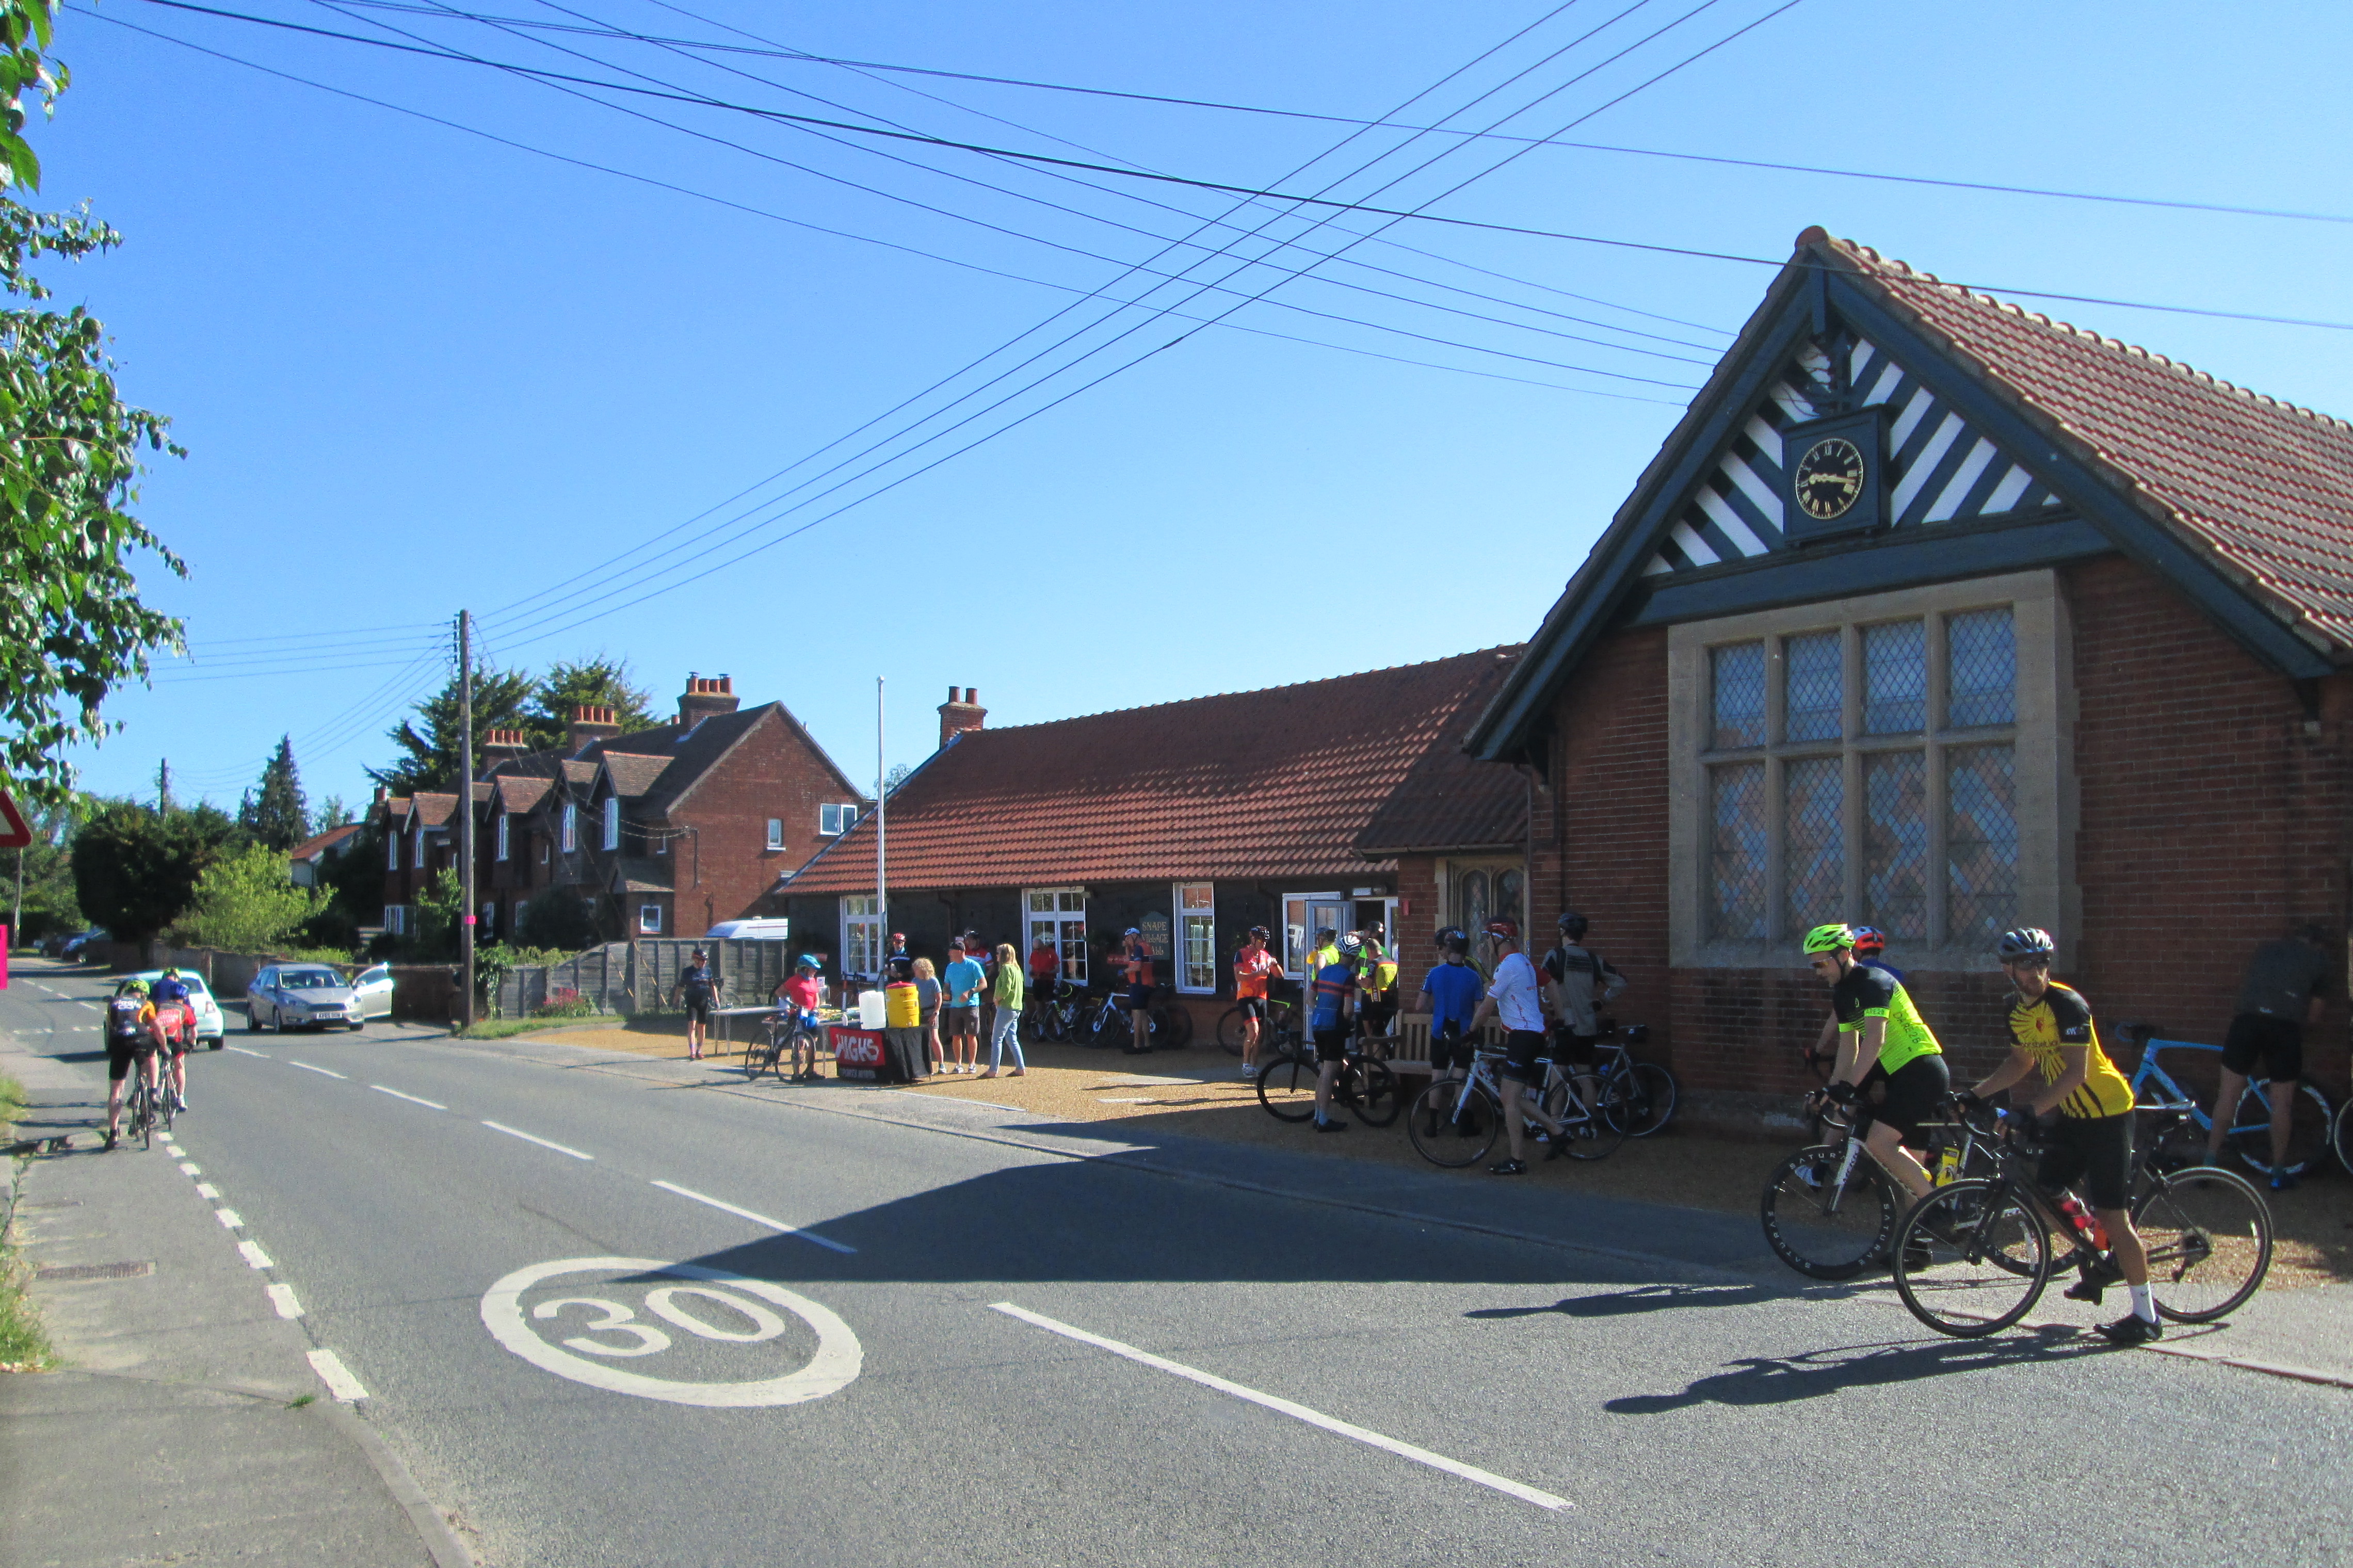 Suffolk 100 cycle event